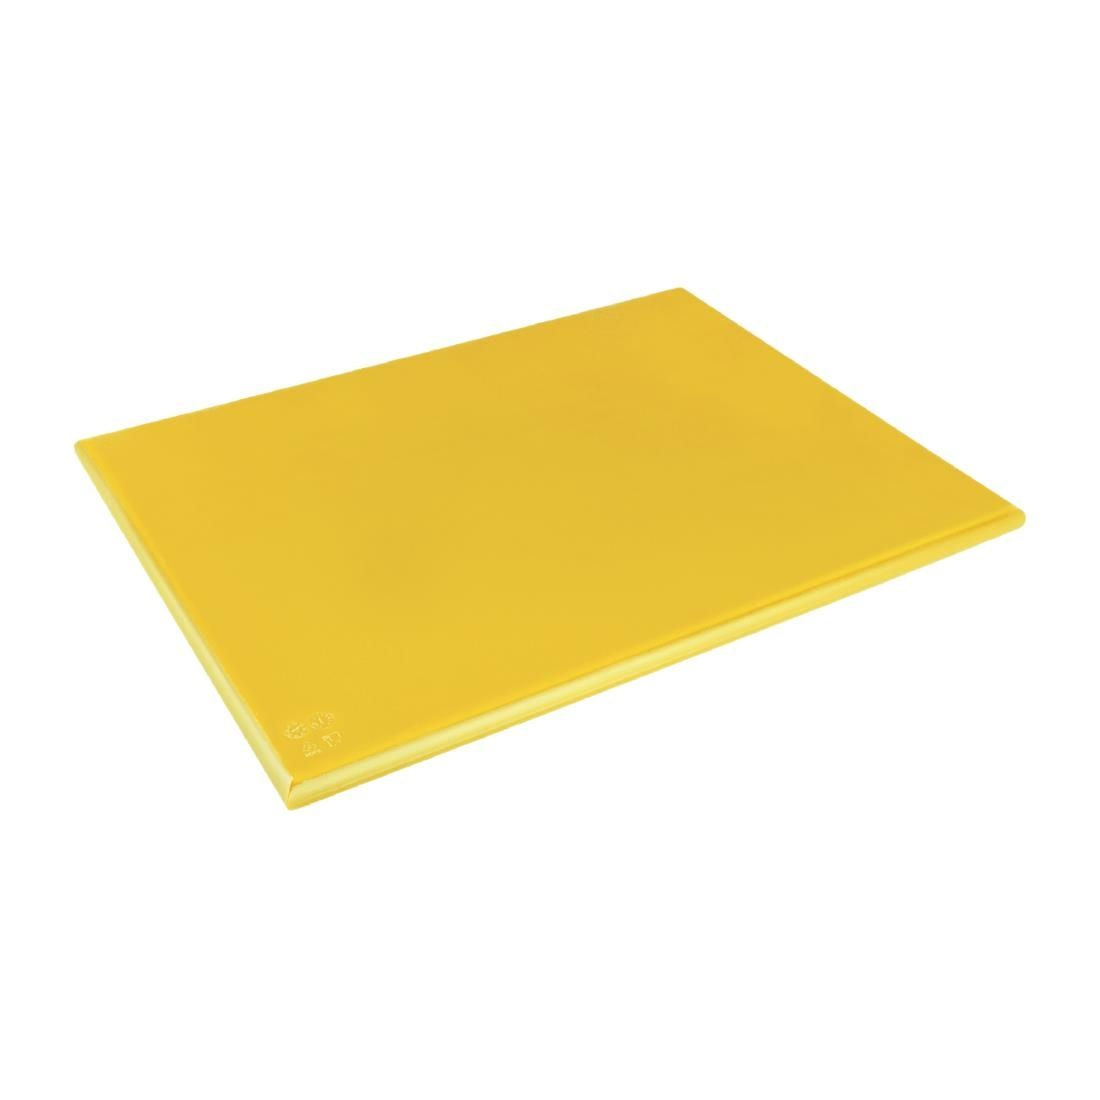 Hygiplas Extra Thick Low Density Yellow Chopping Board Large JD Catering Equipment Solutions Ltd